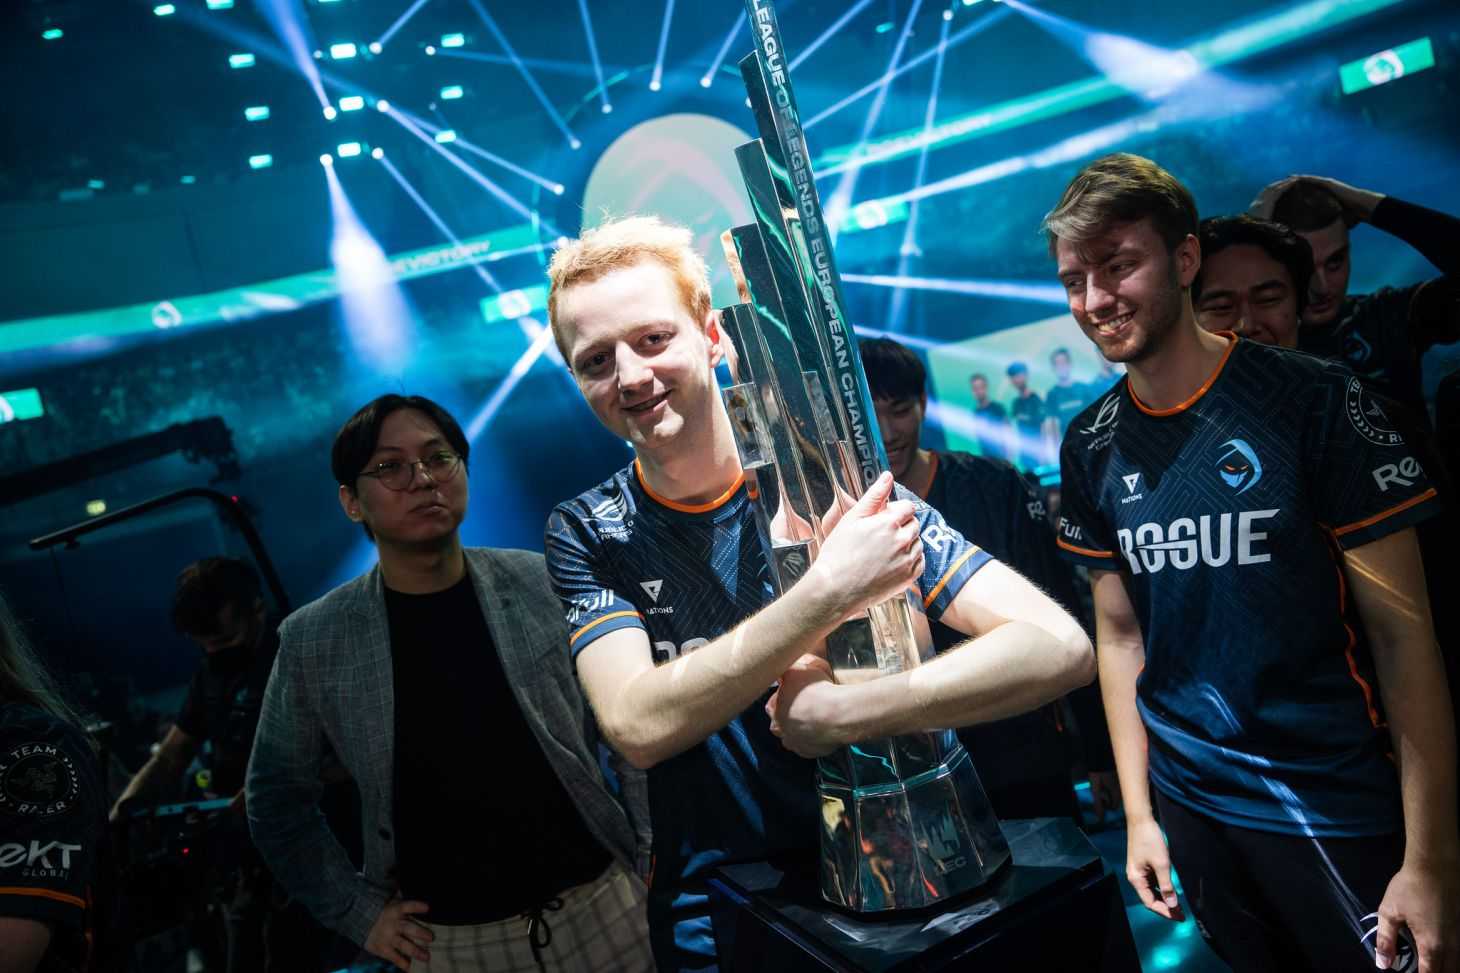 The Return of Rogue to LEC in 2024: A New Chapter in European League of Legends